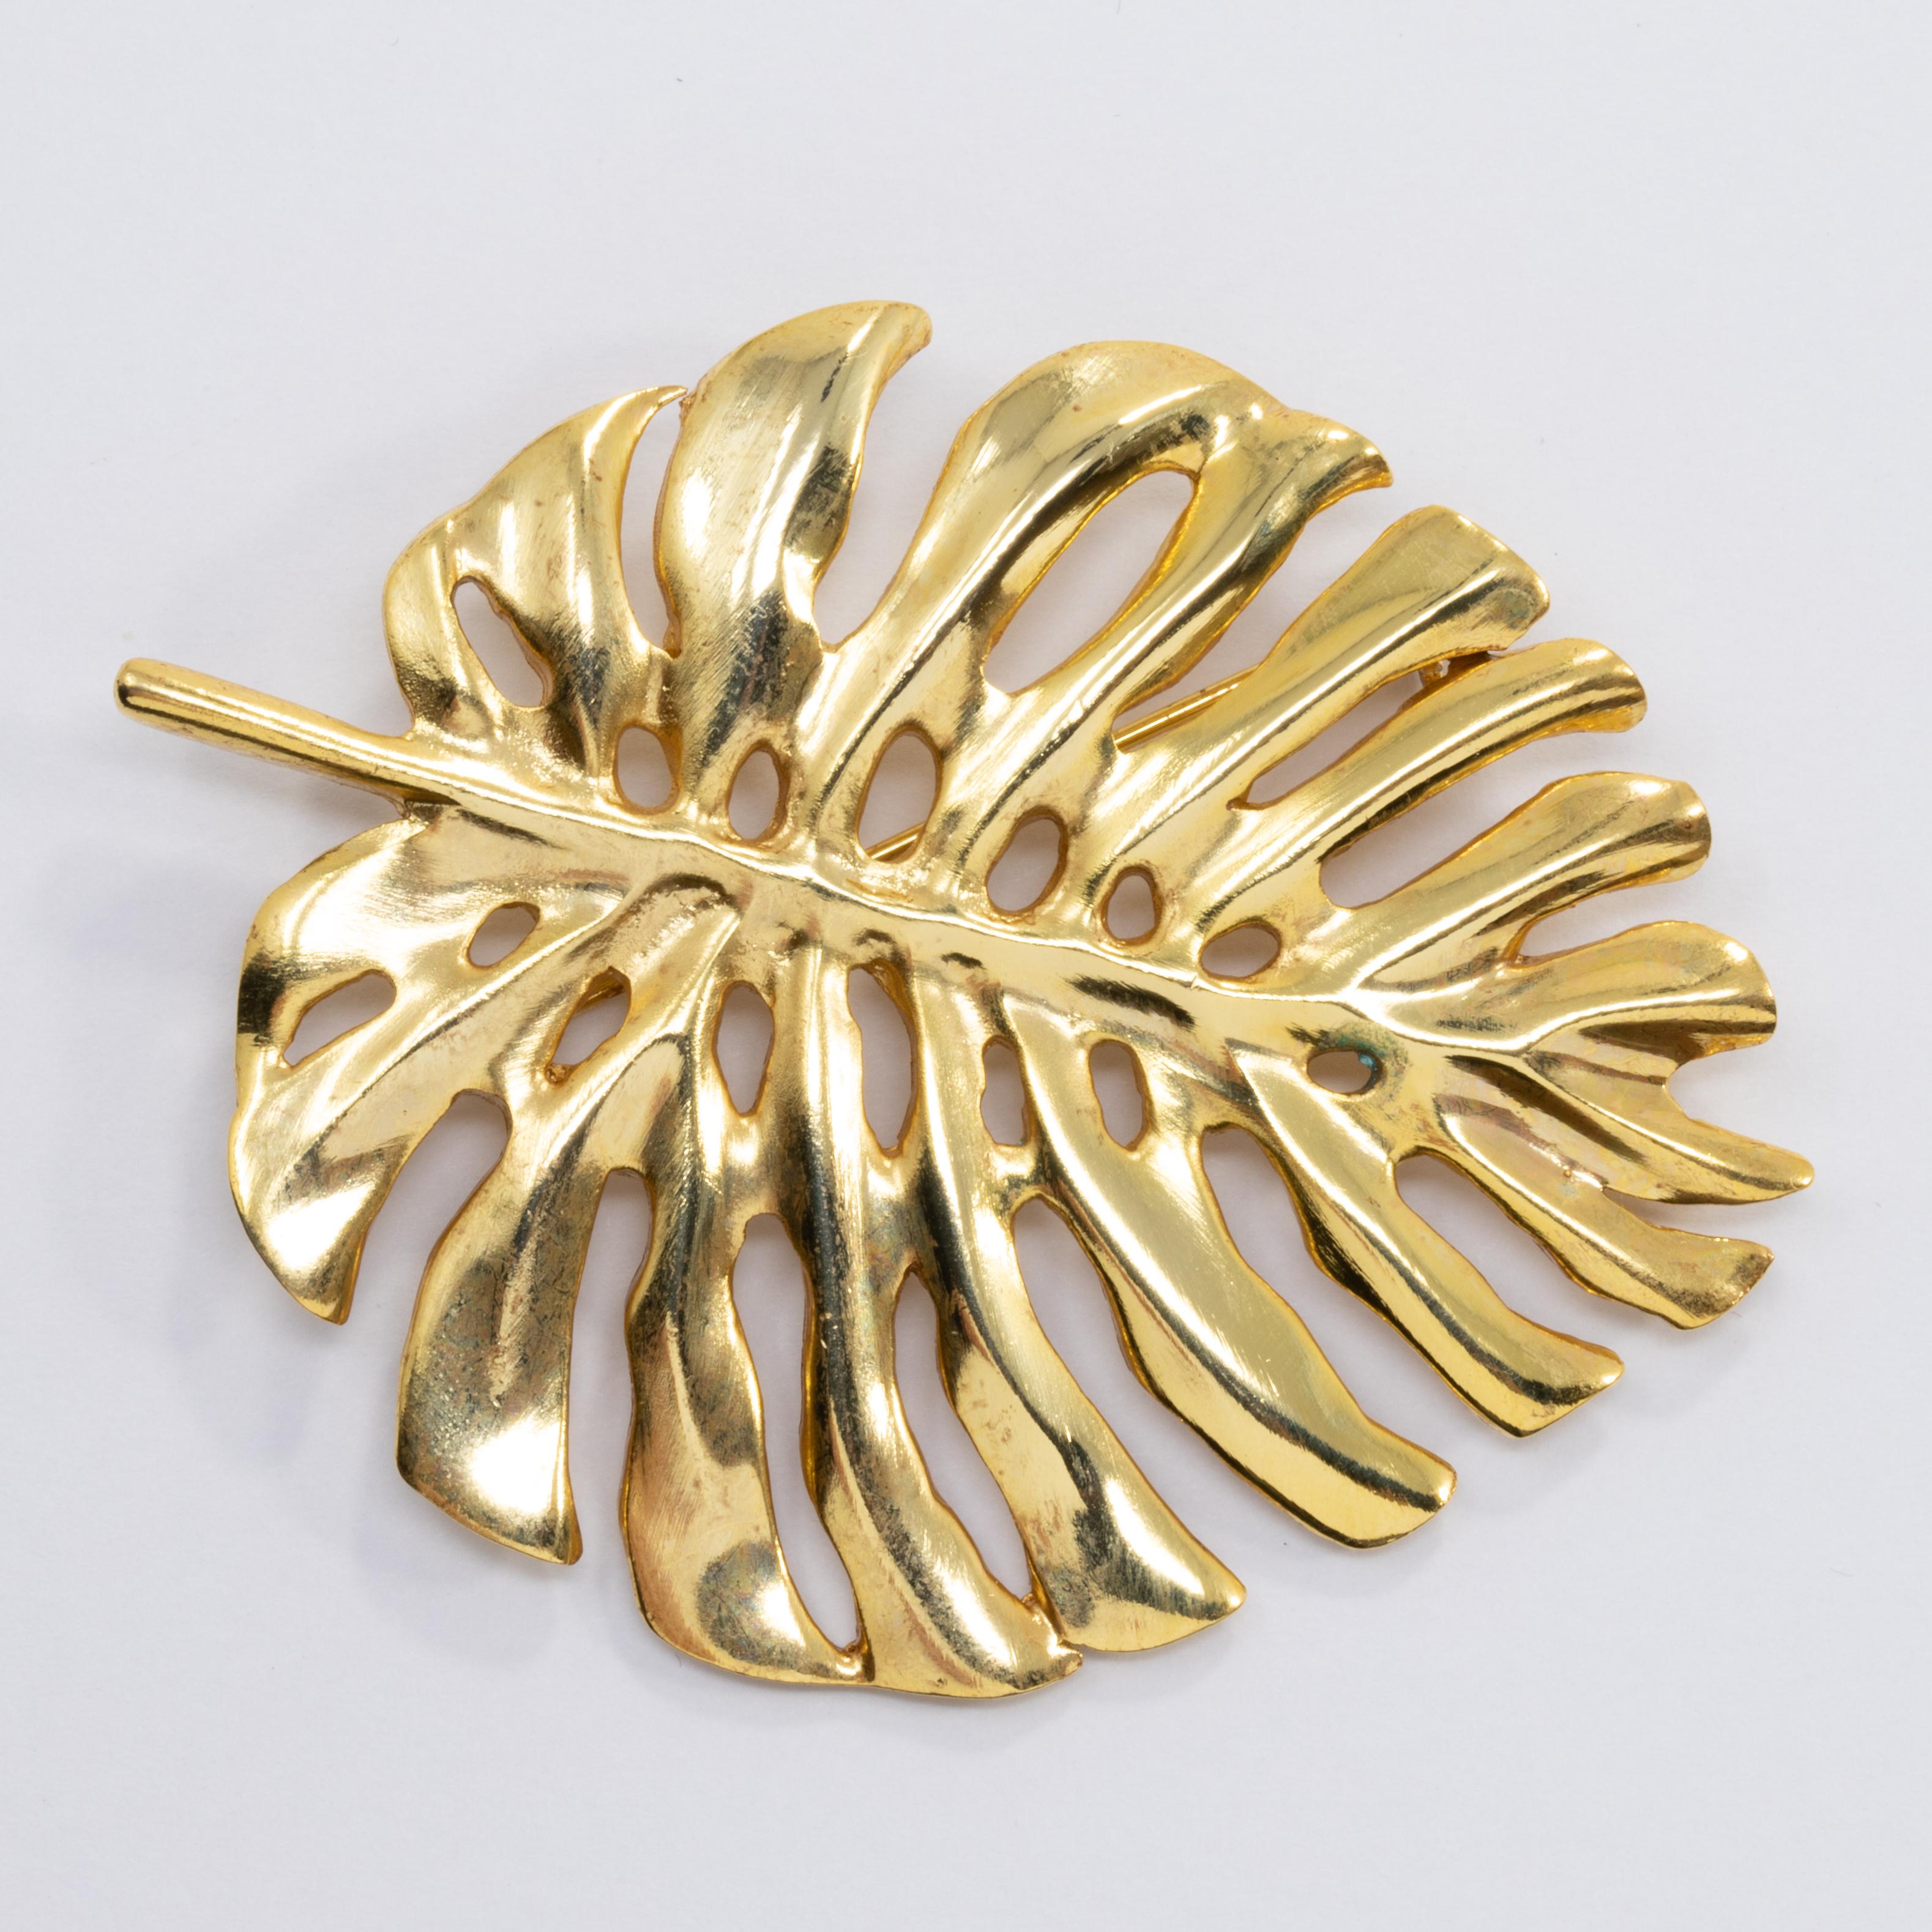 Oscar de la Renta's gold-plated bold monstera leaf brooch. A perfect golden touch to any style!

Hallmarks: Oscar de la Renta, Made in USA